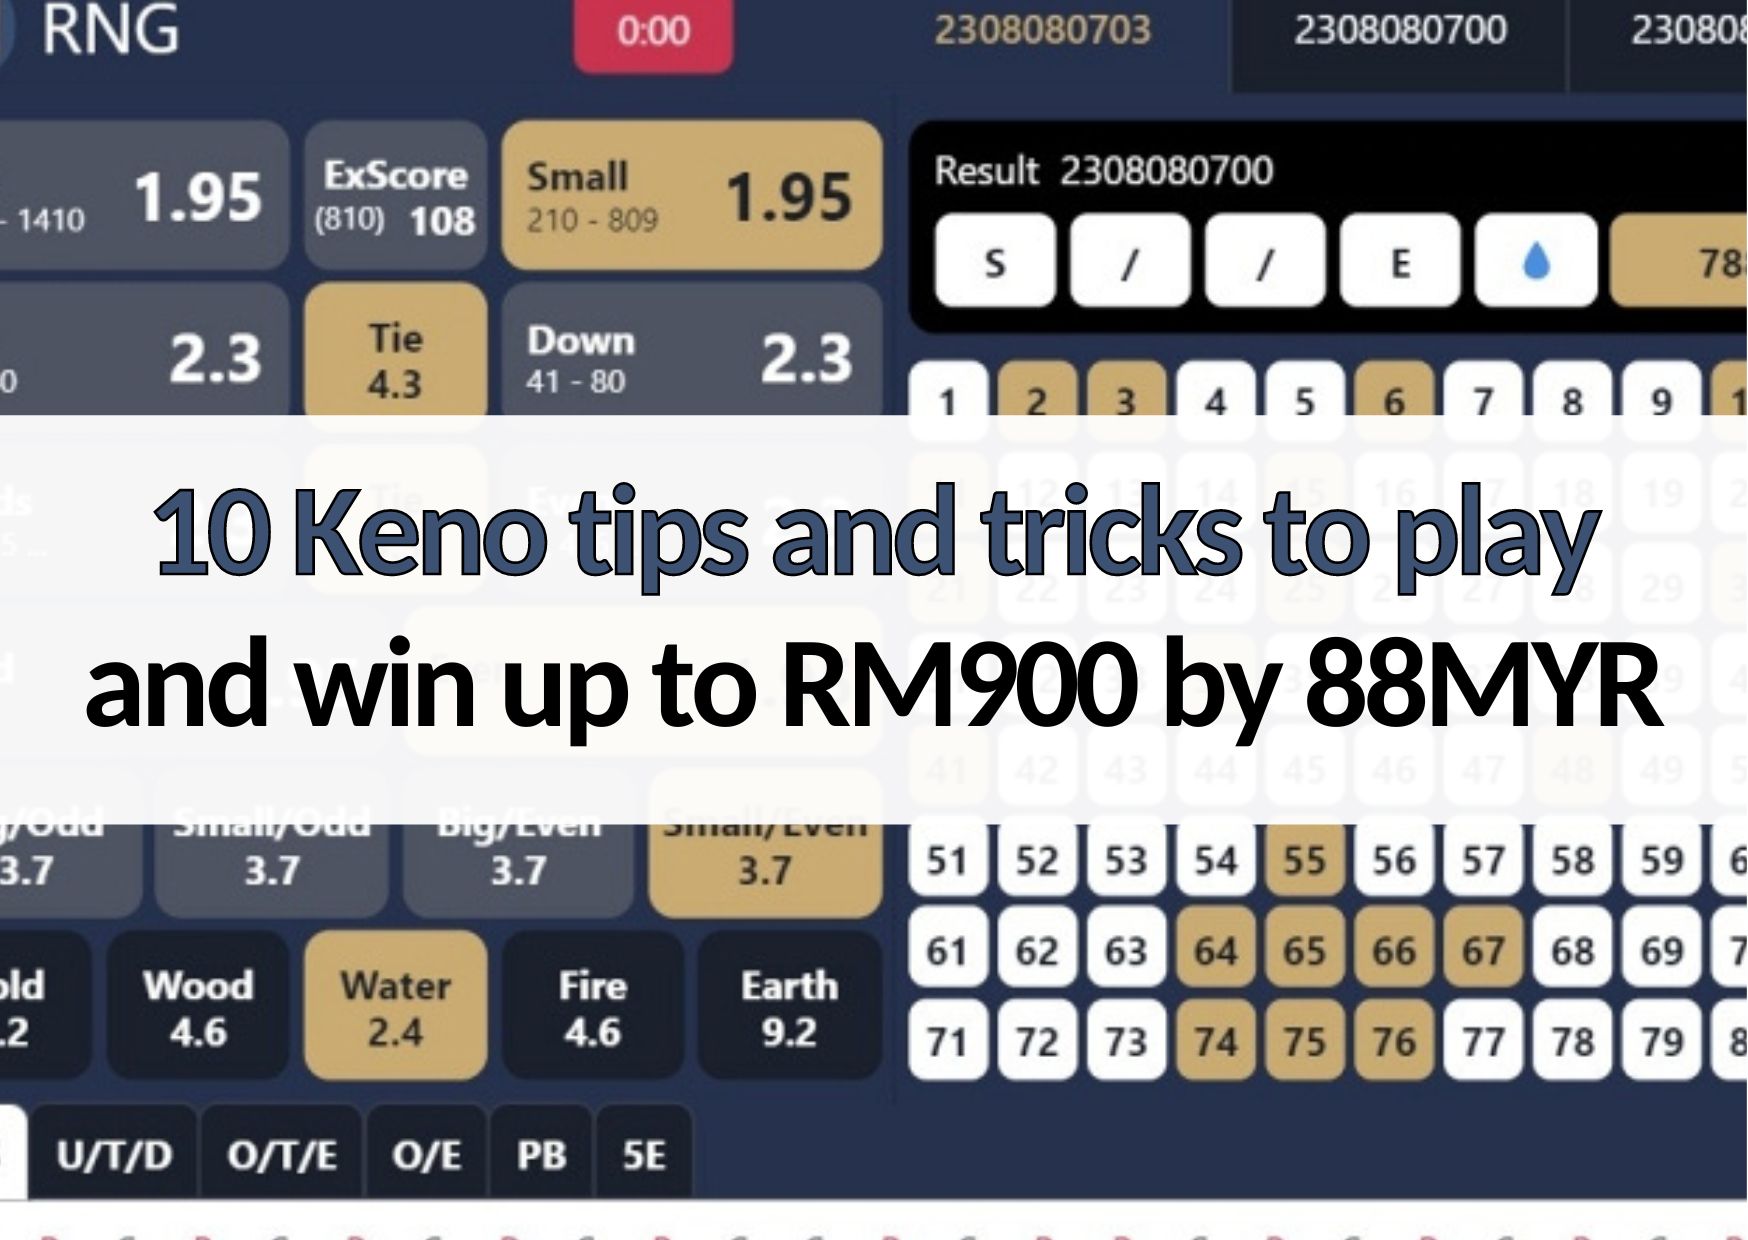 88myr m88 keno tips and tricks to play